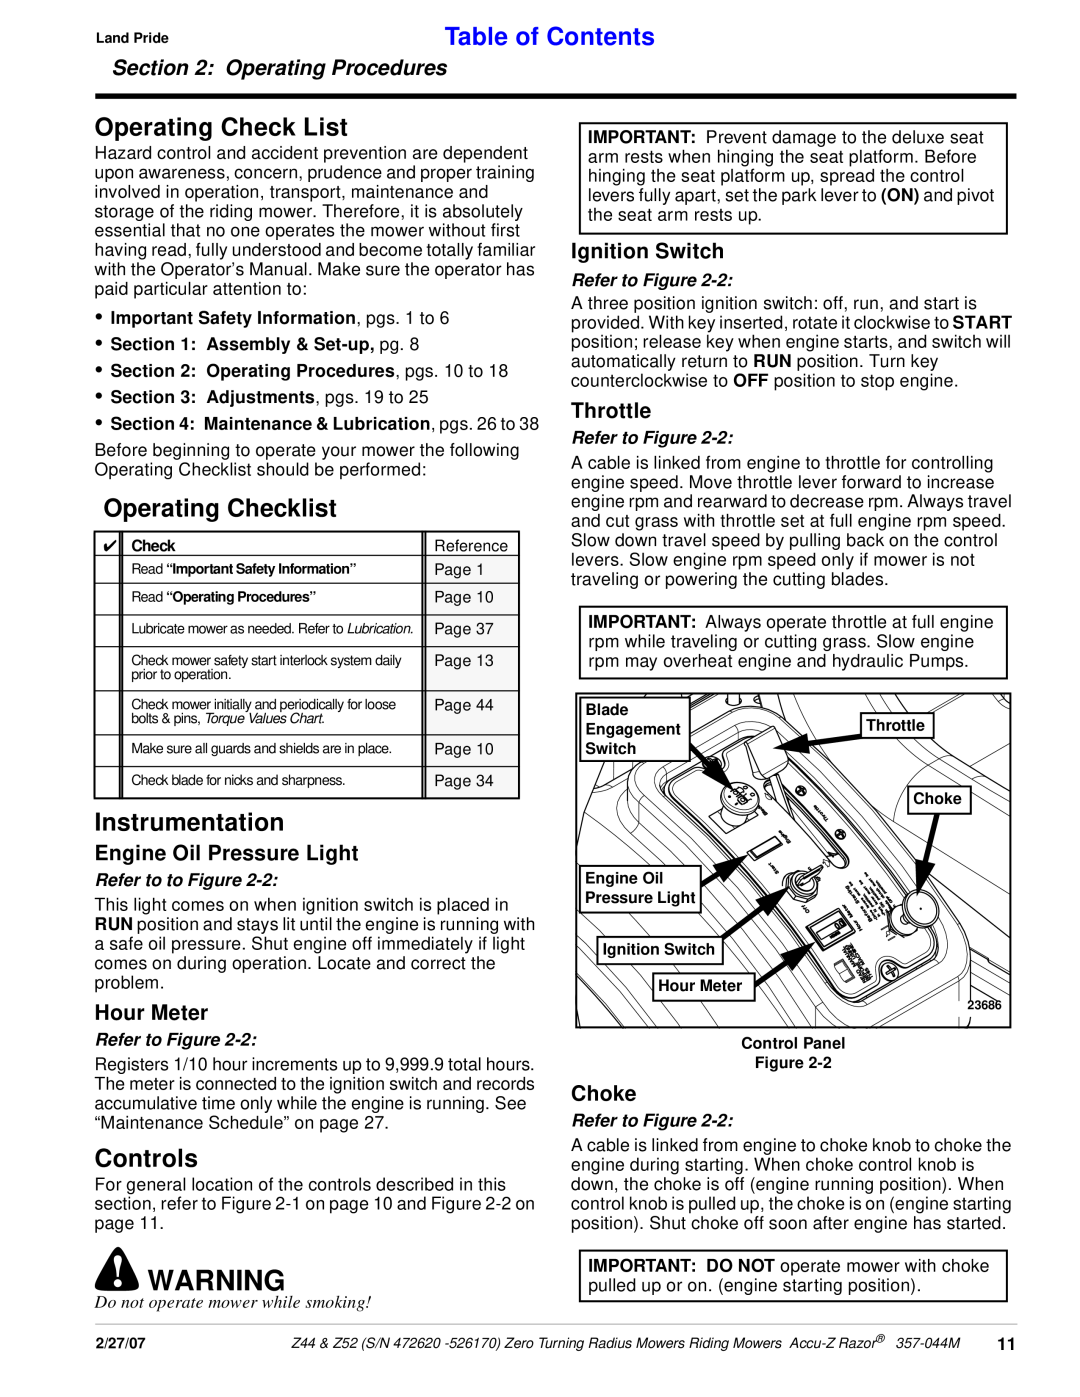 Land Pride 357-044M Land PrideTable of Contents, Operating Check List, Operating Checklist, Instrumentation, Controls 